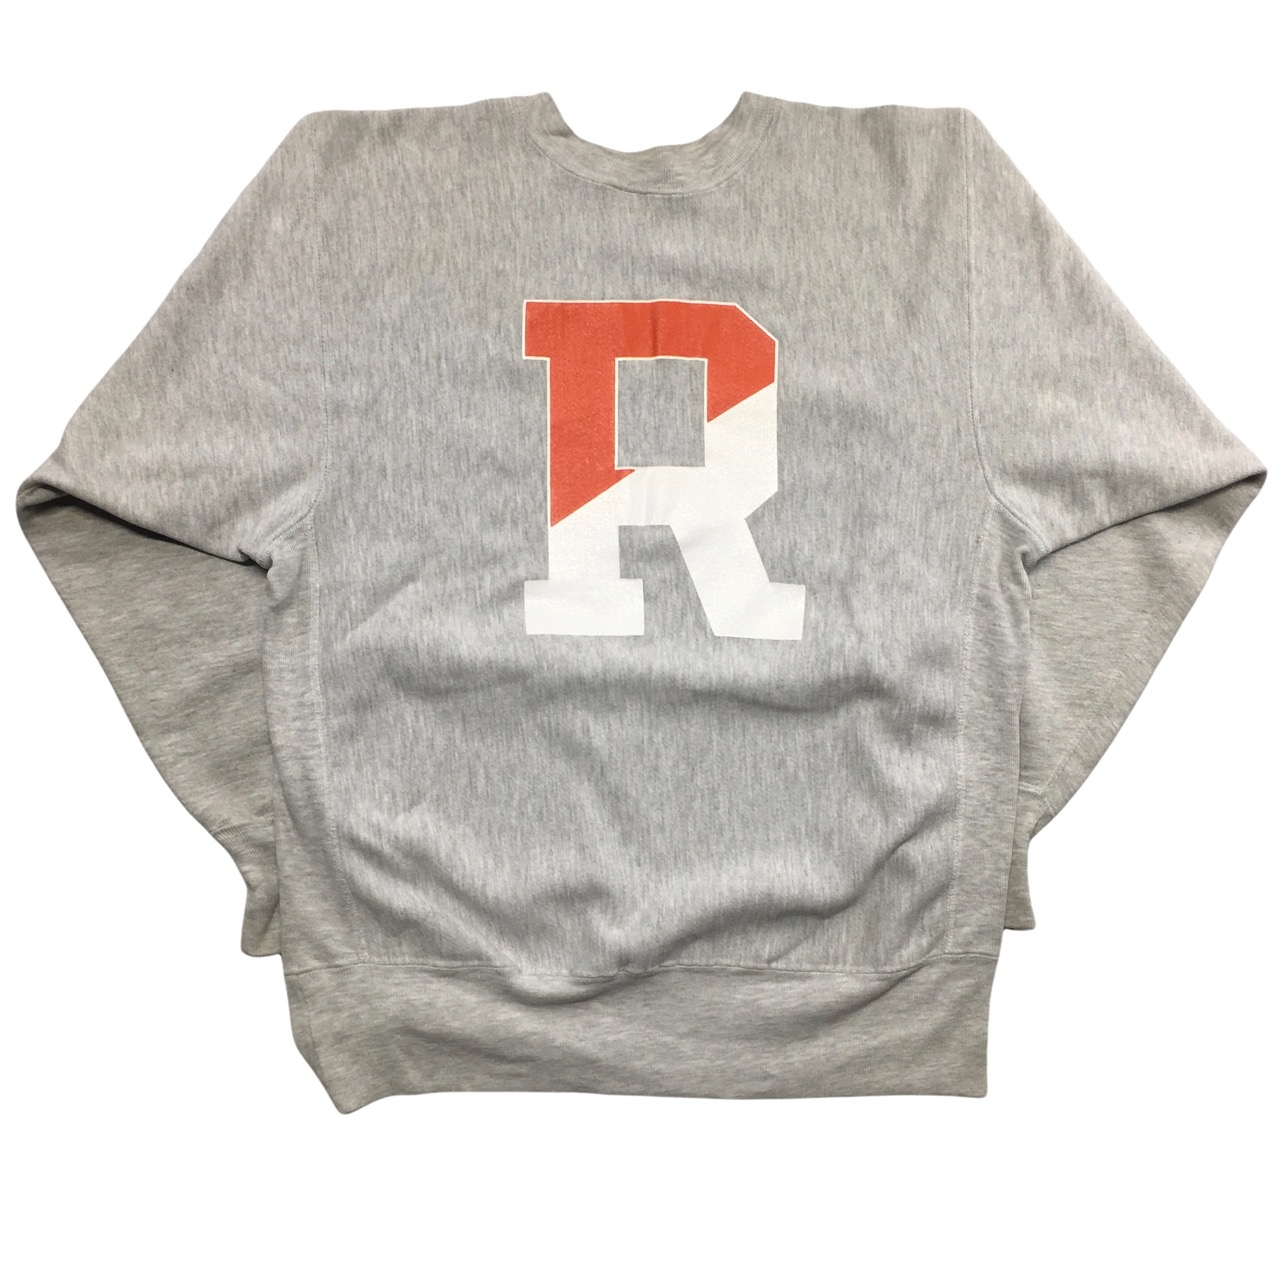 90s Champion Reverse Weave 両面プリント “RIT TIGERS” “R” (SIZE:L 